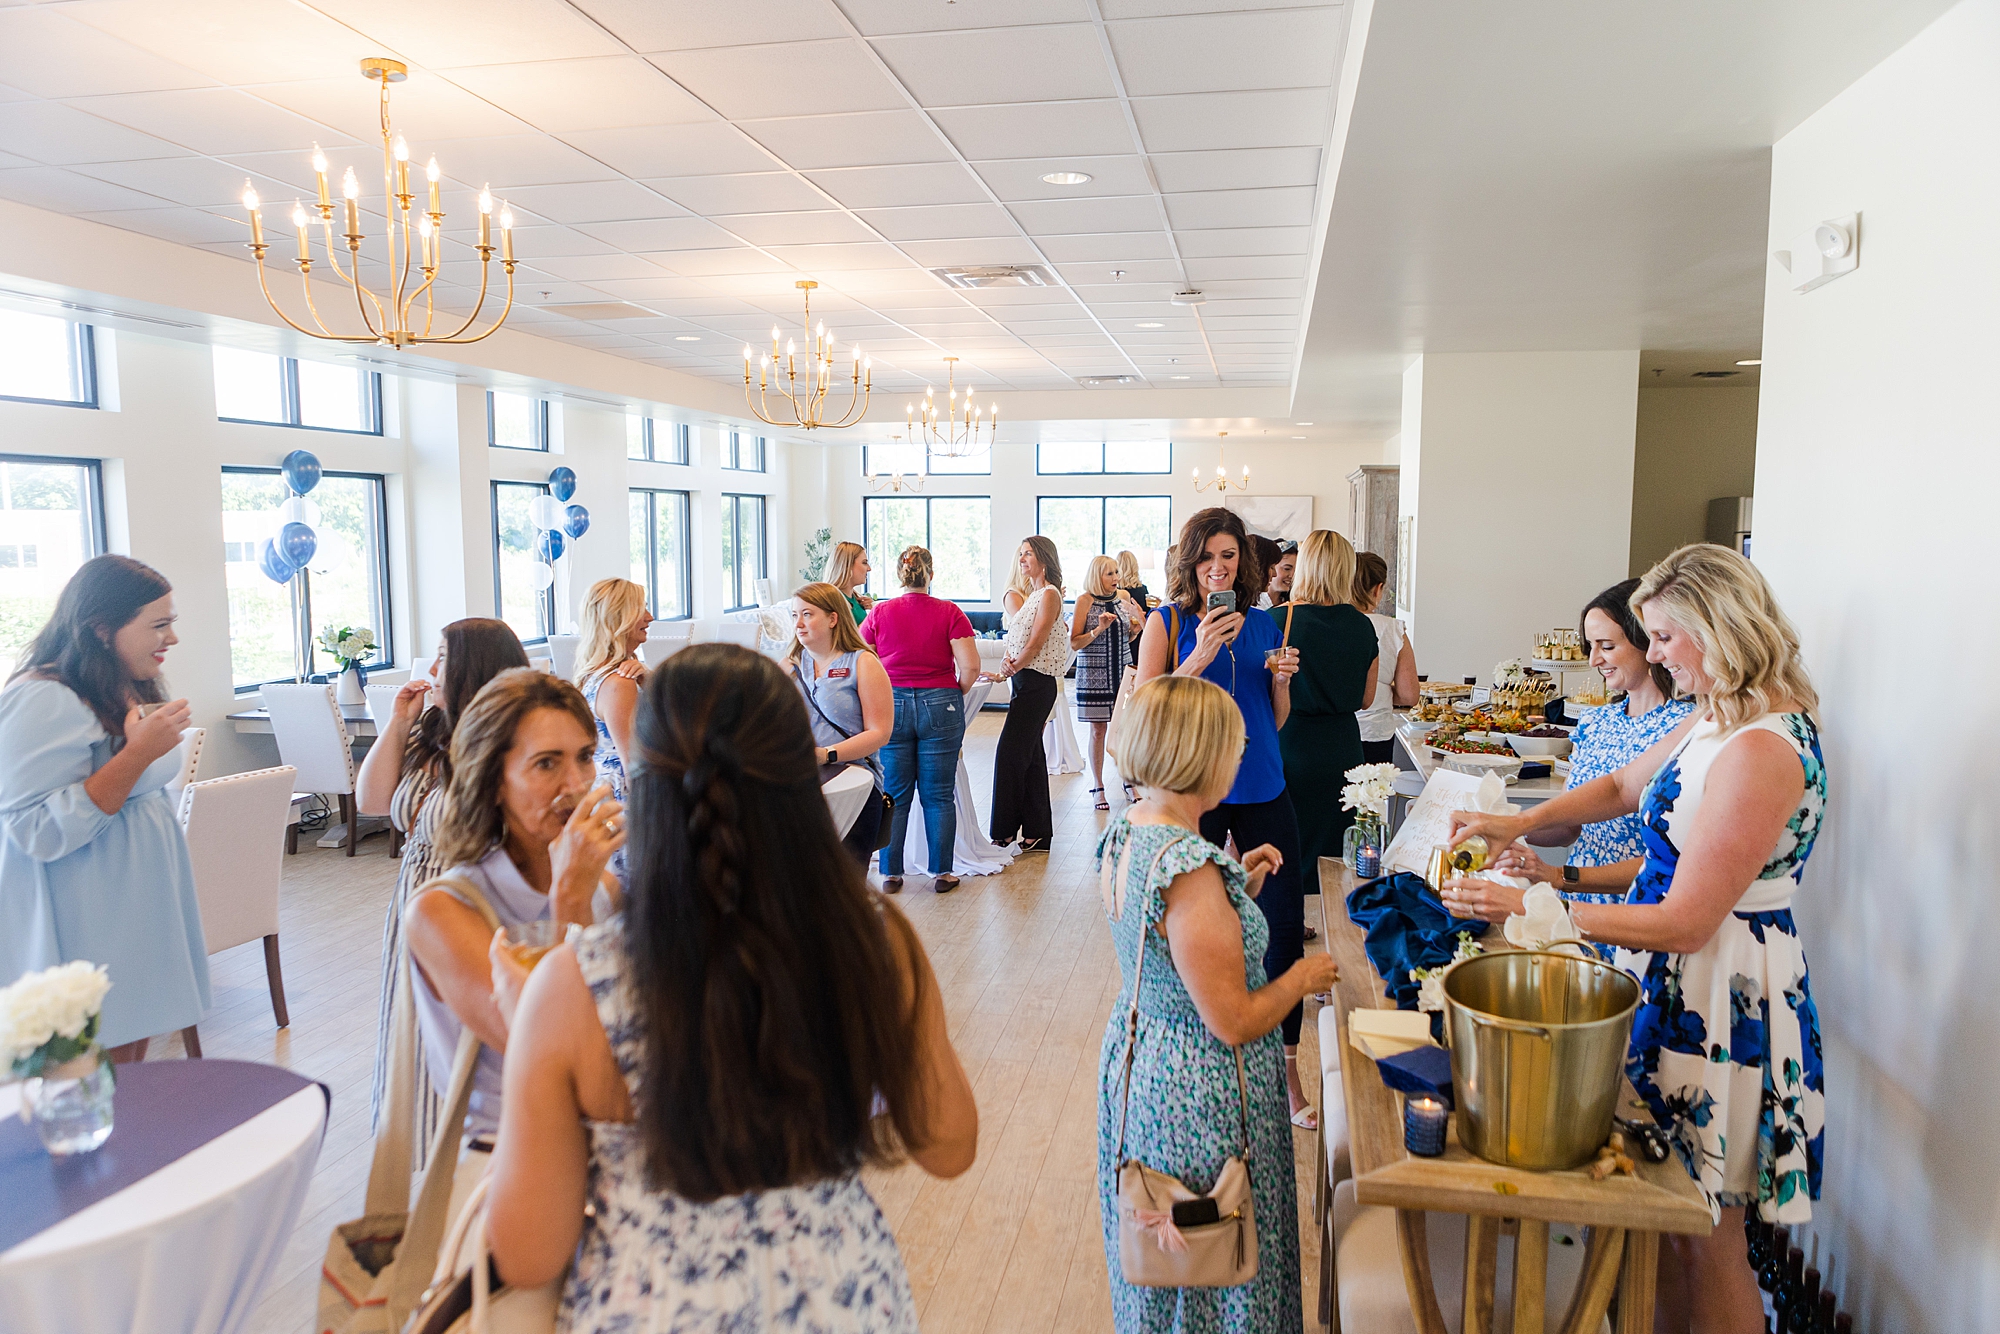 women mingle and talk during networking event